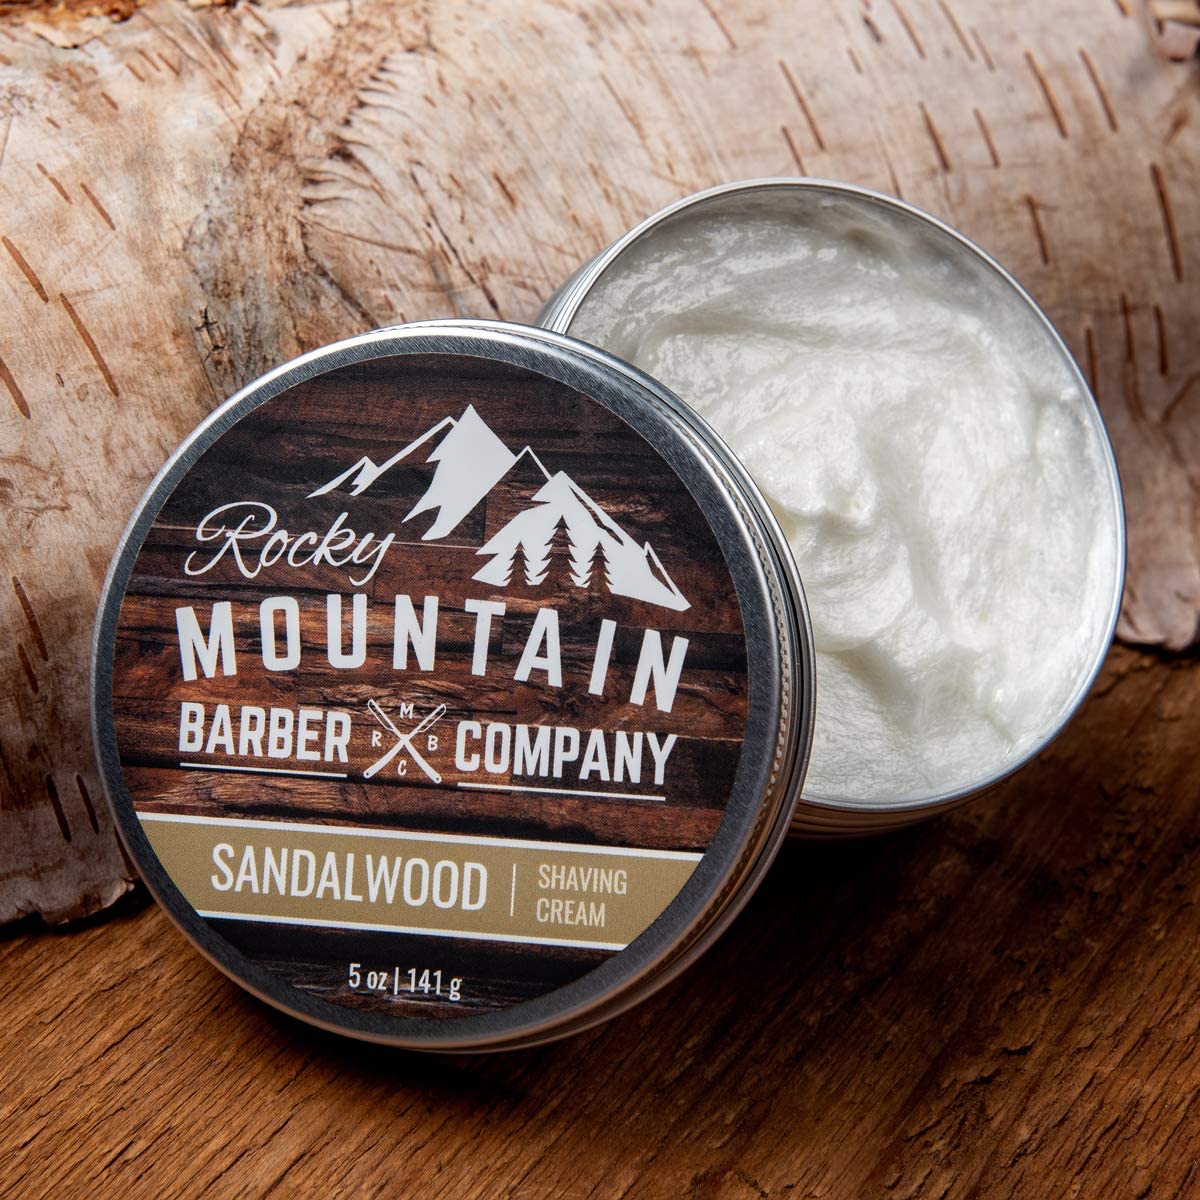 Shaving Cream for Men - With Natural Sandalwood Essential Oil - 5 oz Hydrating, Anti-inflammatory Rich & Thick Lather for Sensitive Skin & All Skin Types by Rocky Mountain Barber Company - 5 Ounce - image 2 of 8